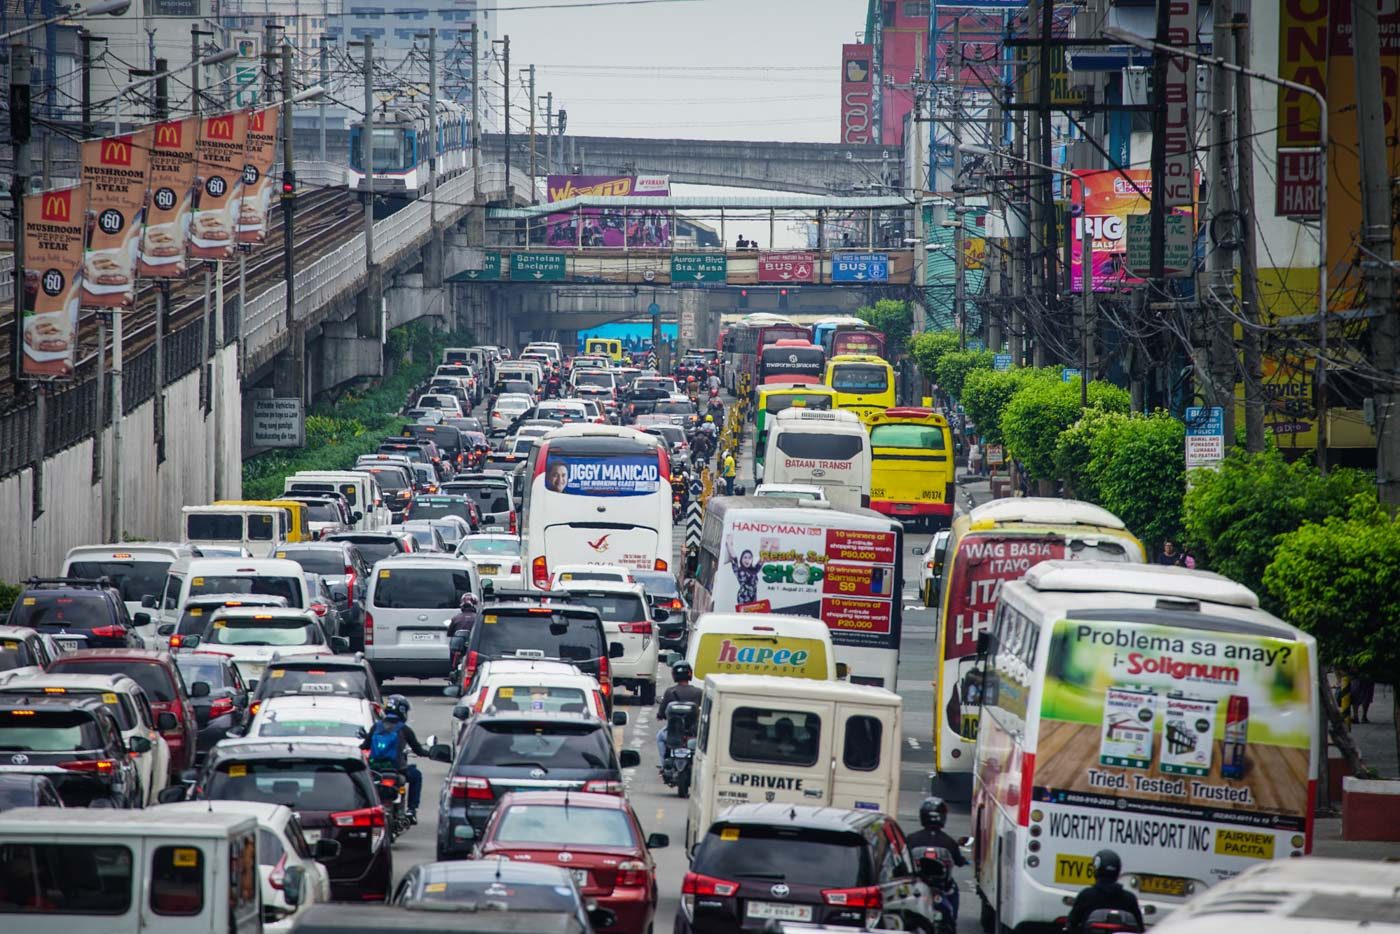 Higher fine for illegal parking effective January 7, says MMDA